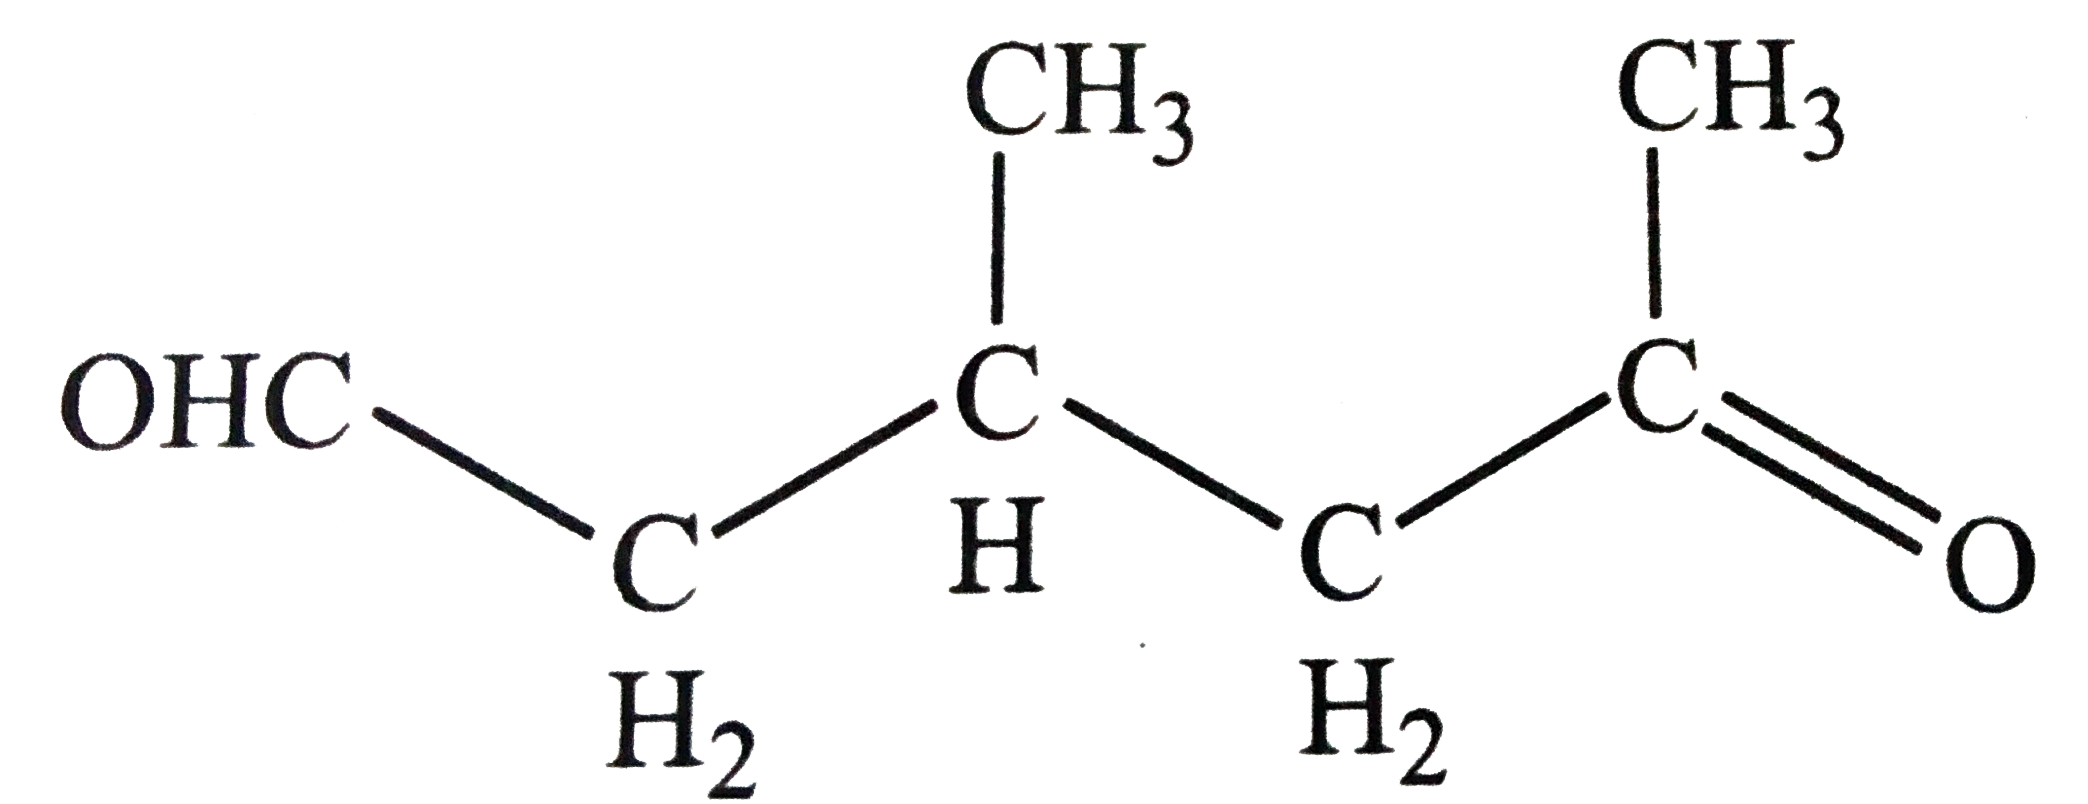 A single compound of the structure:    is obtainable from ozonolysis of which of the following cyclic compounds?